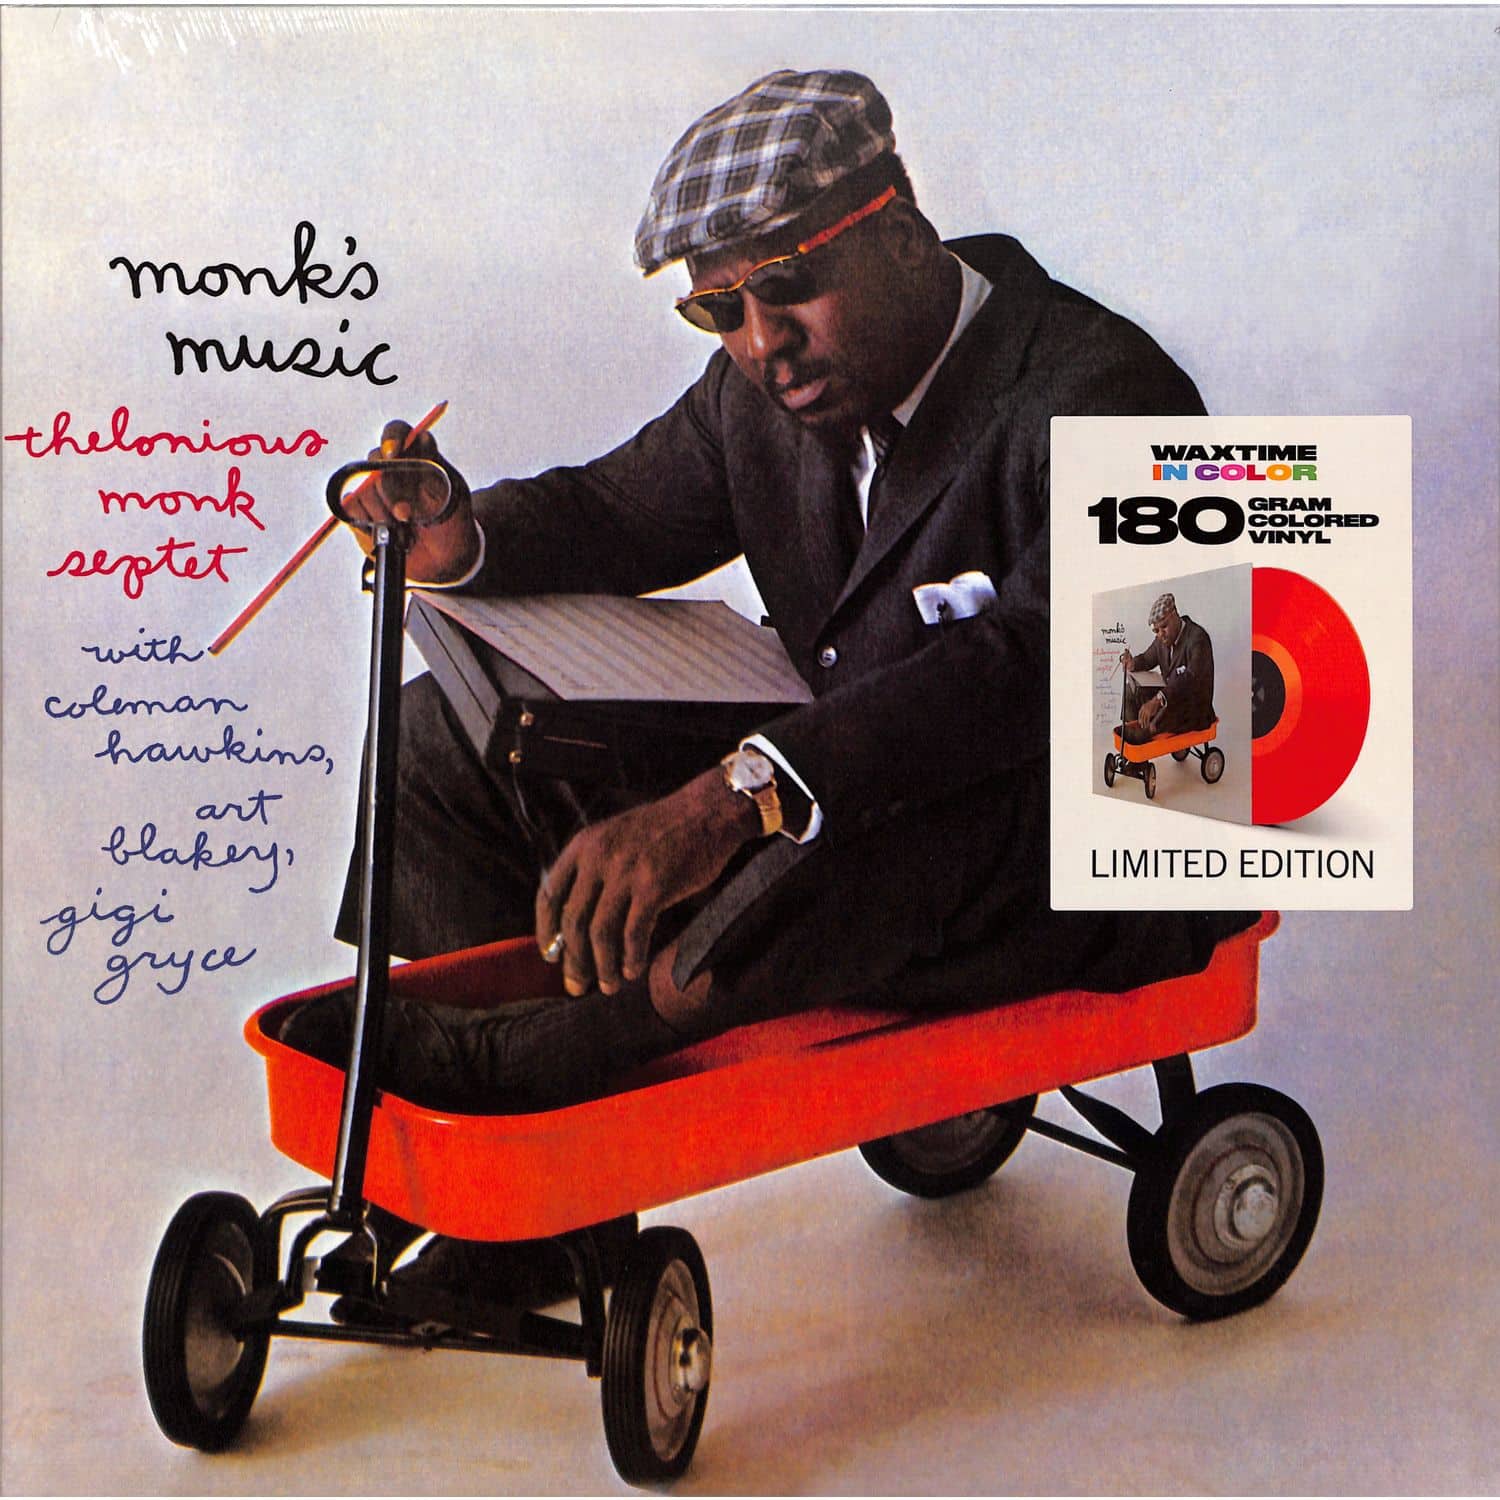 Monk Thelonious - MONKS MUSIC 